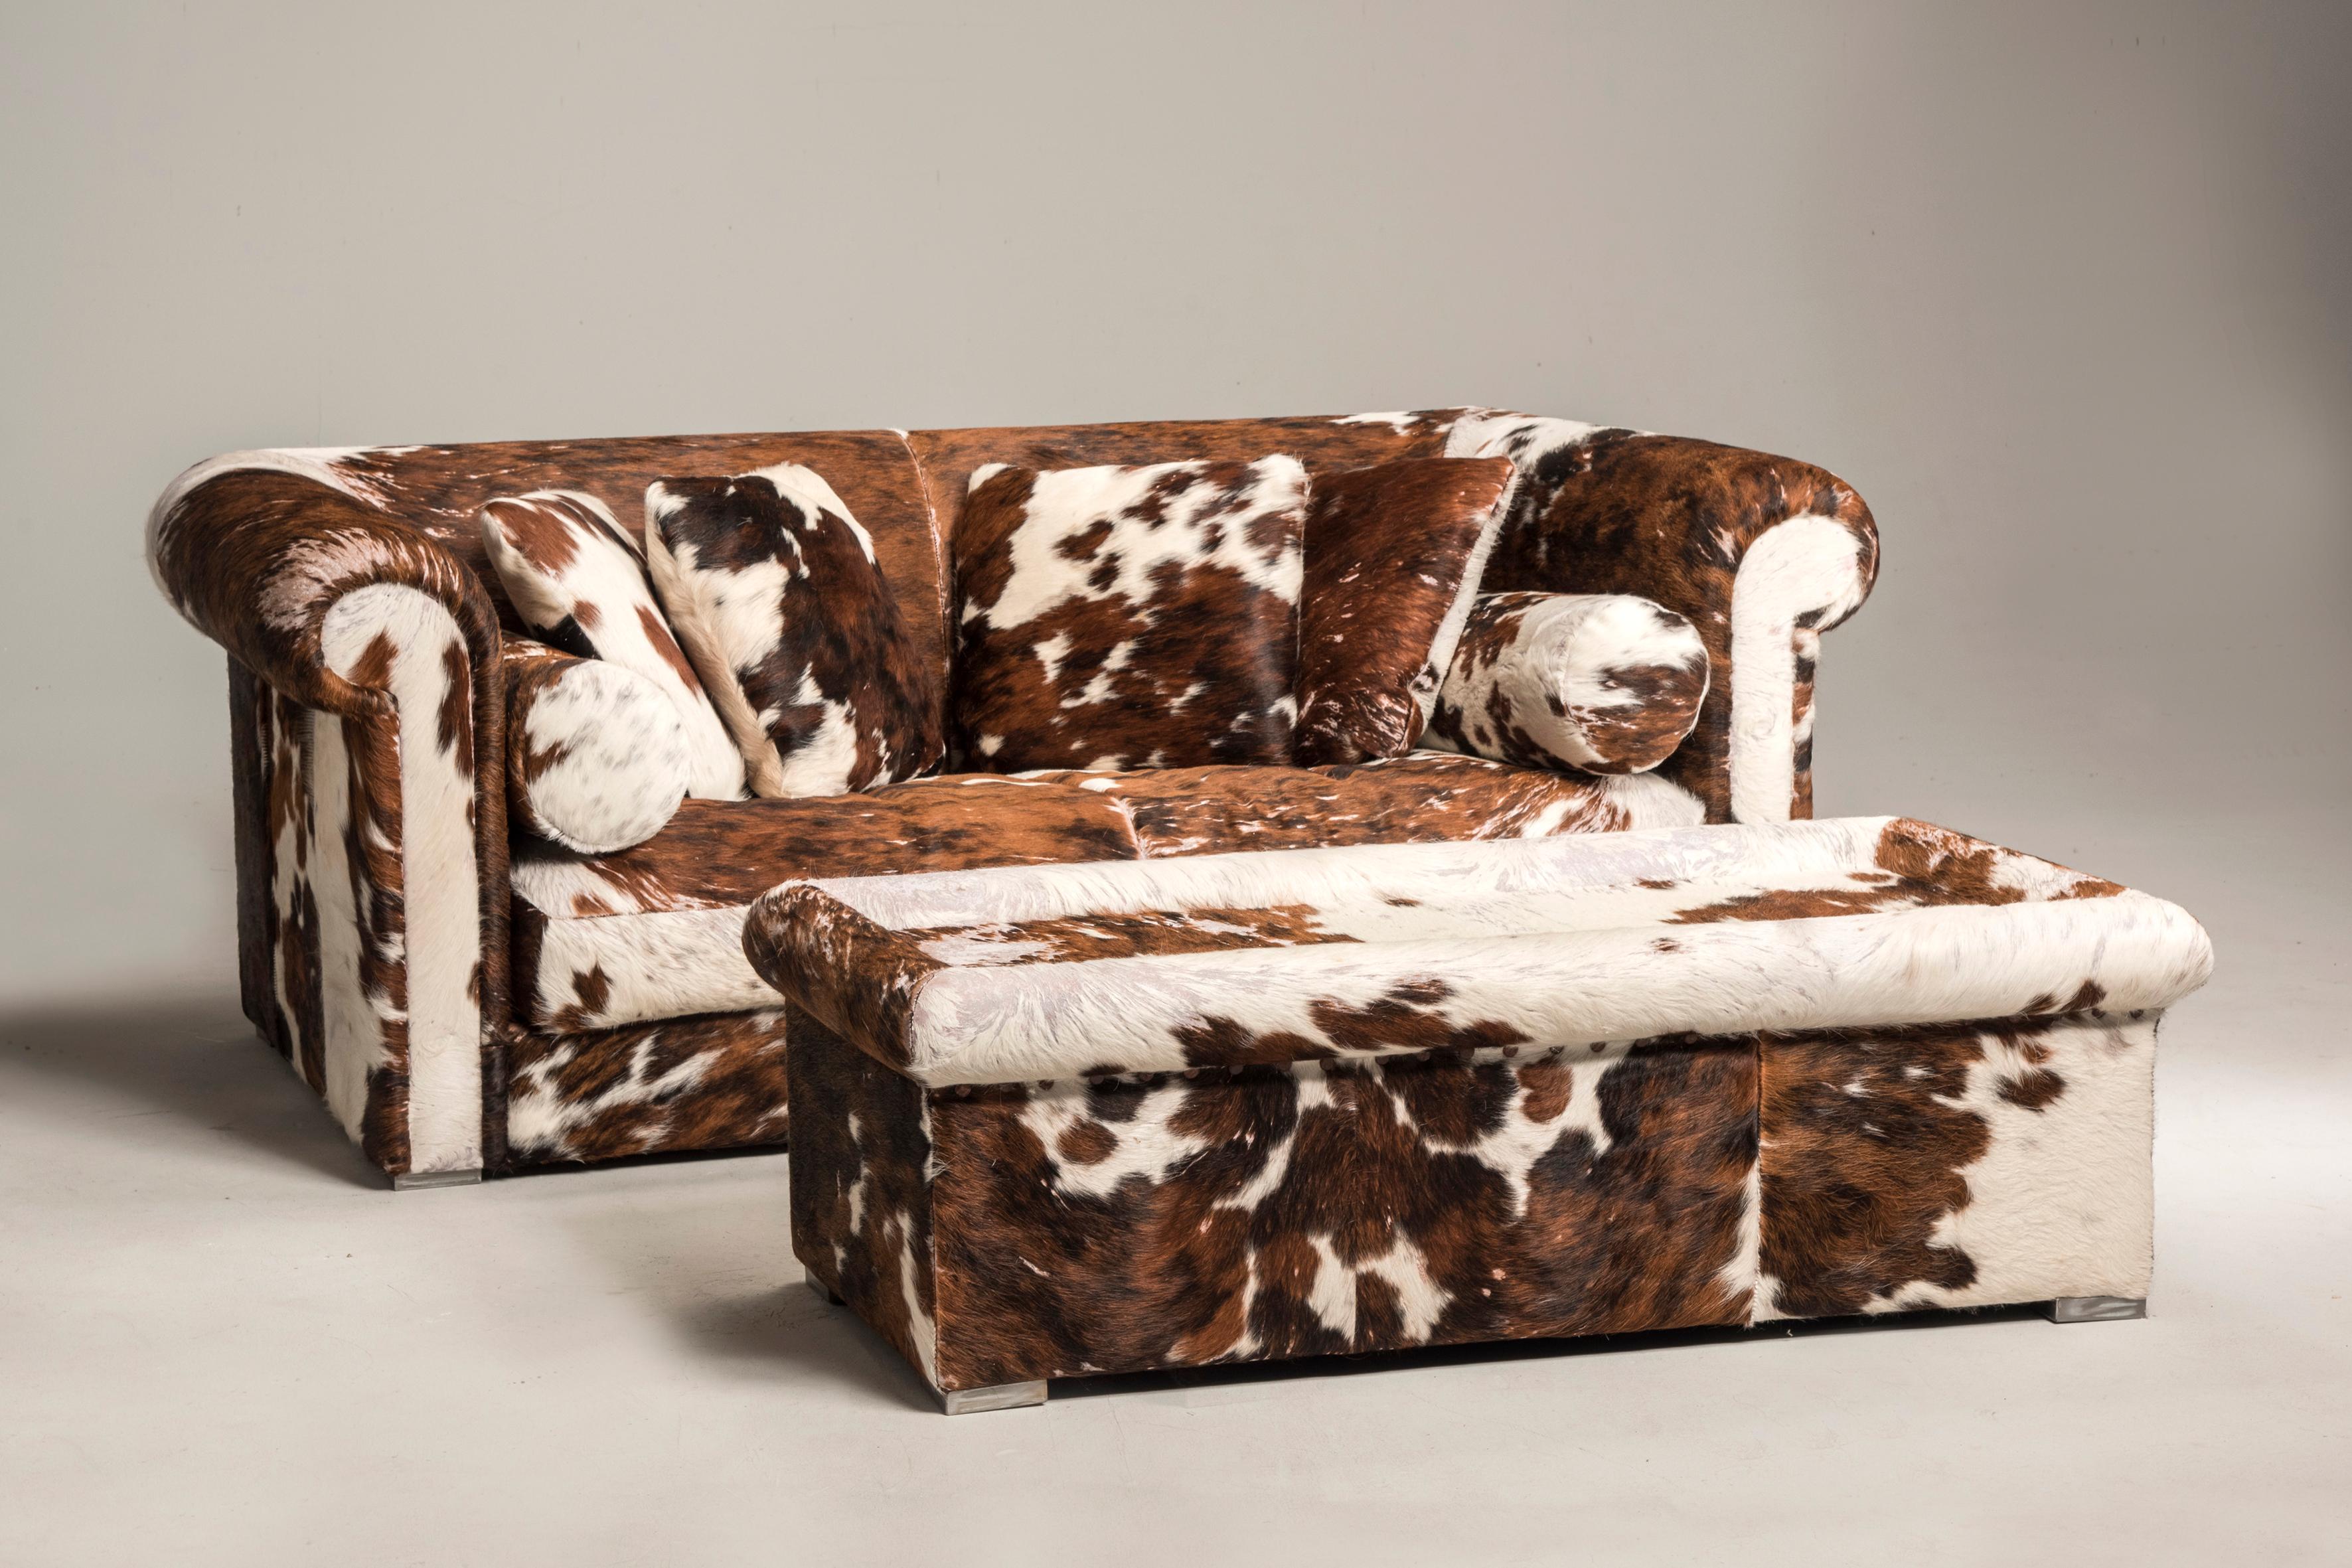 European Baxter Brown and Dappled pony skin Leather Sofa with Pillows, Italy, 1990s For Sale